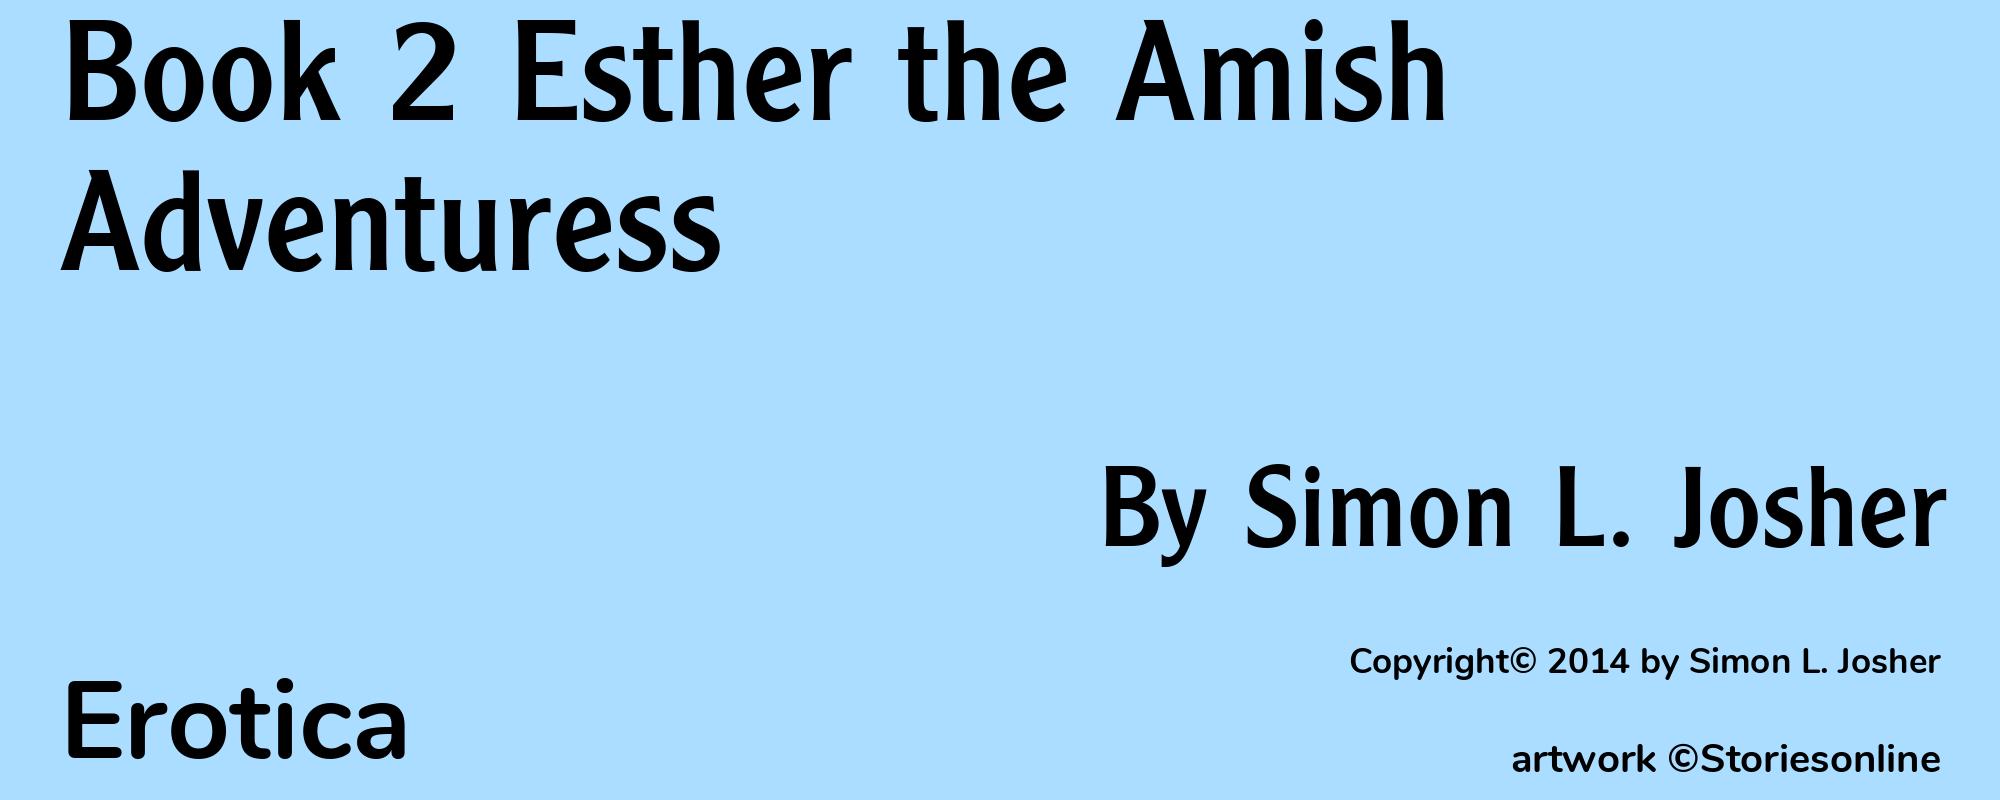 Book 2 Esther the Amish Adventuress - Cover